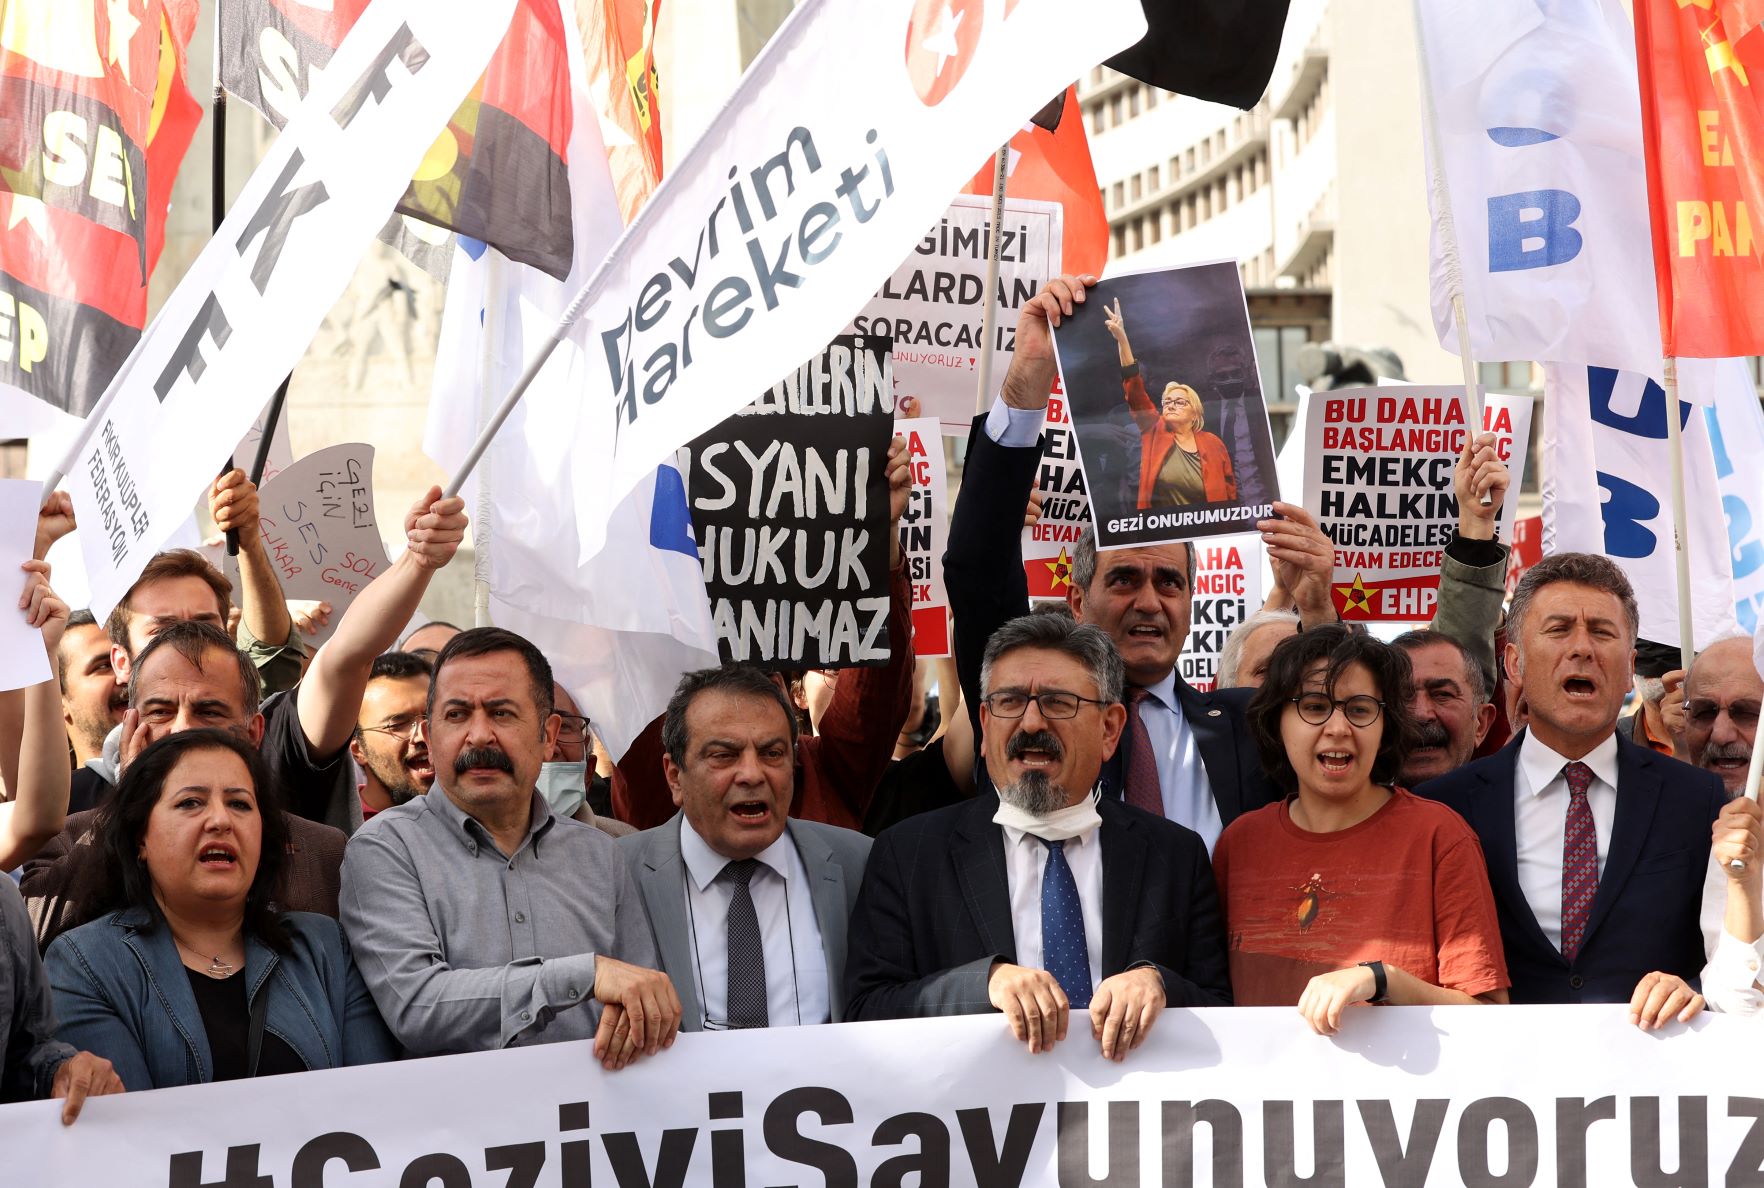 Protesters hold placards and shout slogans in Ulus Square in Ankara on April 26, 2022 during a rally in support of civil society leader Osman Kavala (AFP)